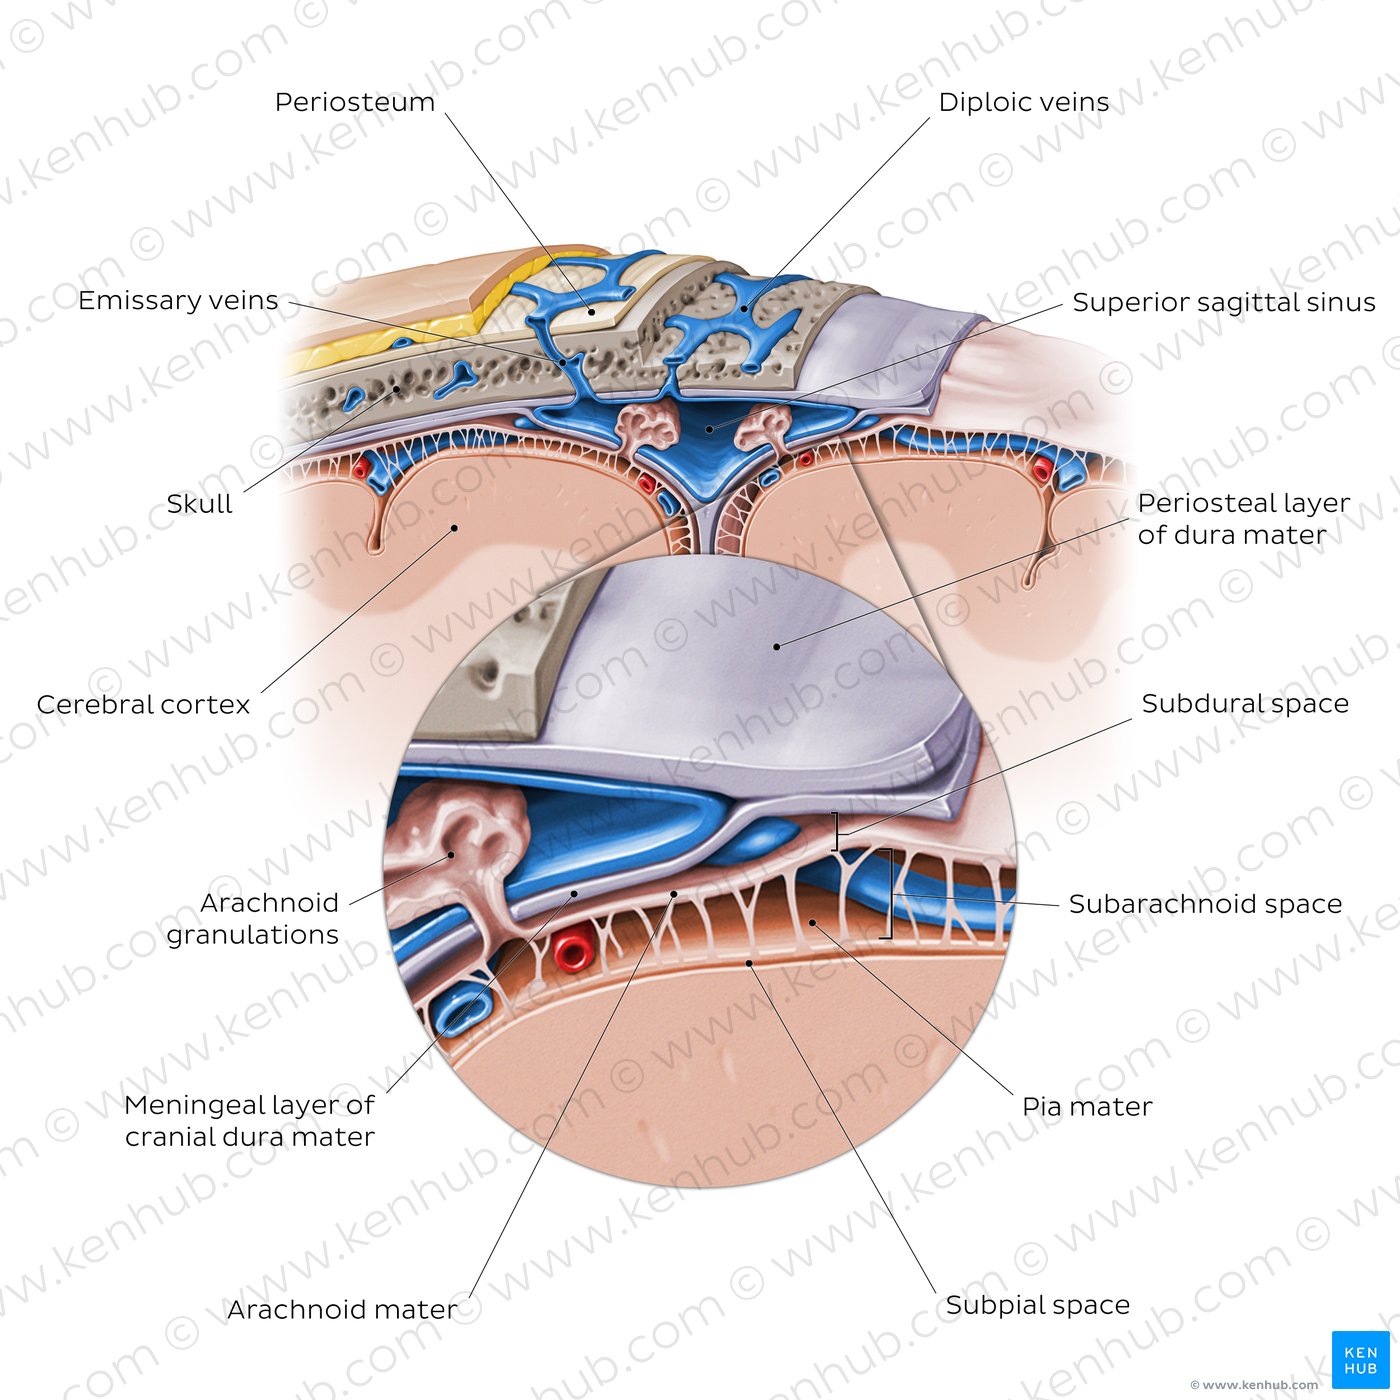 Meninges of the brain (coronal section)